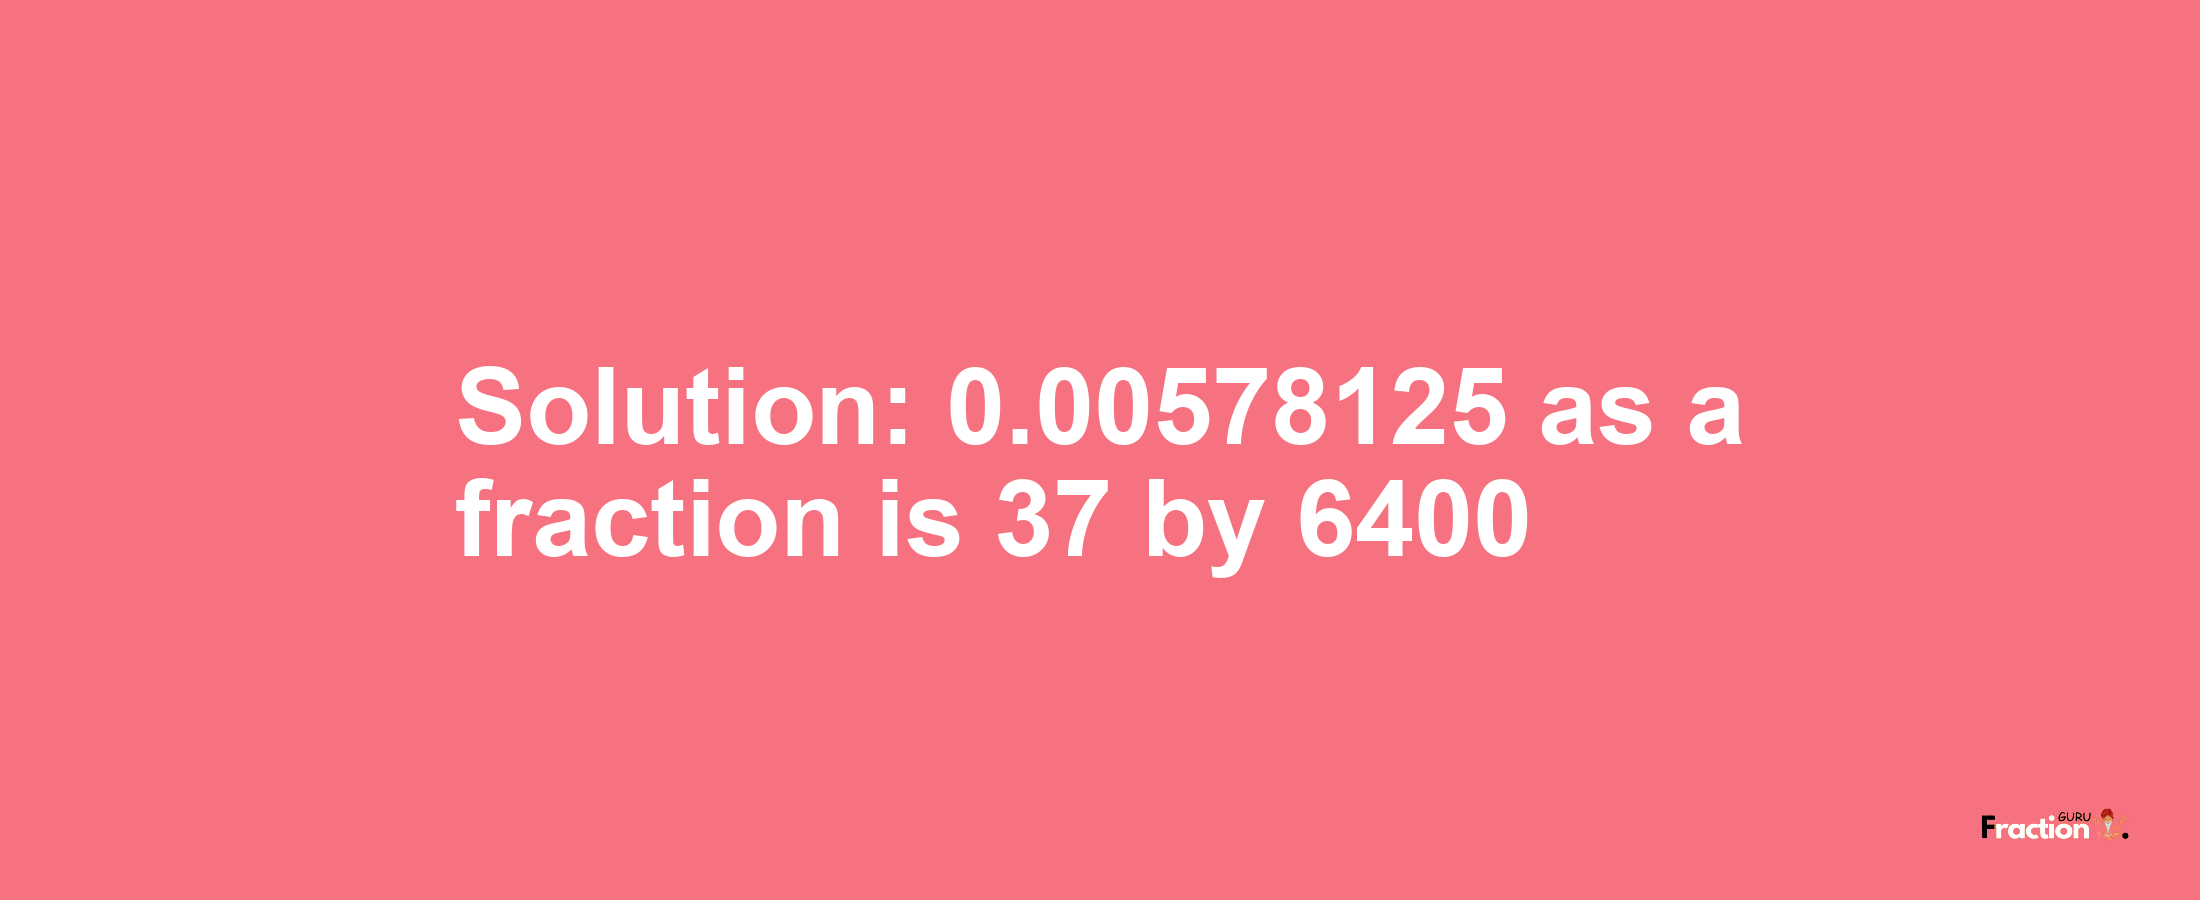 Solution:0.00578125 as a fraction is 37/6400